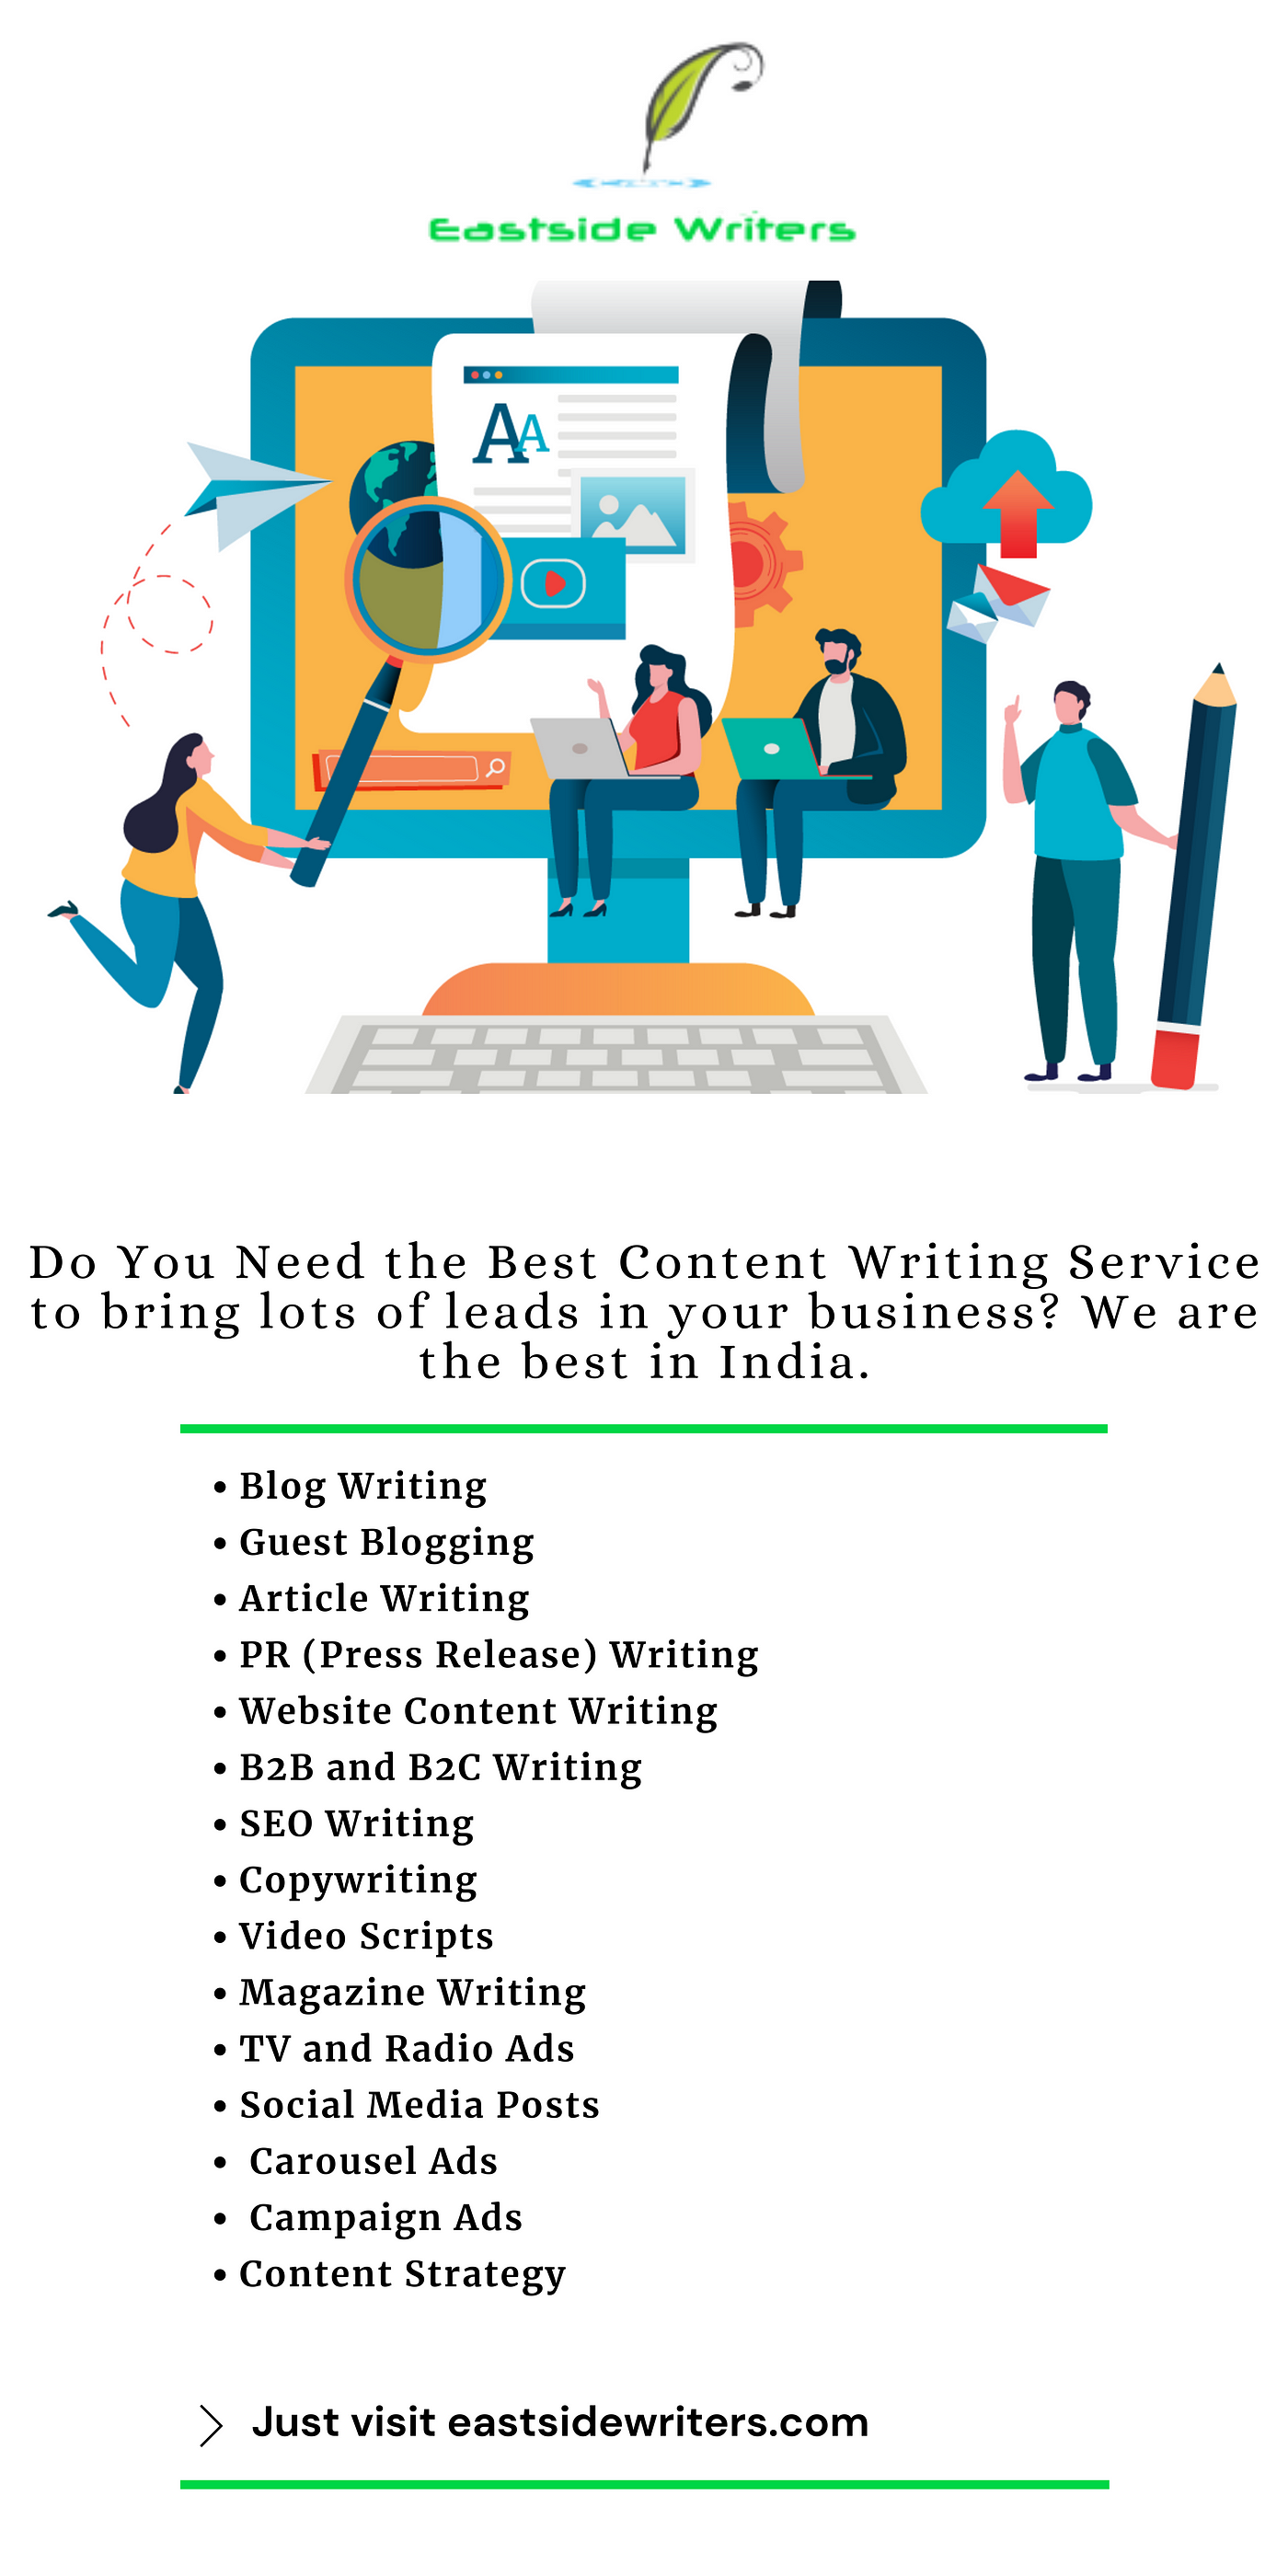 Direct Response Writing Services